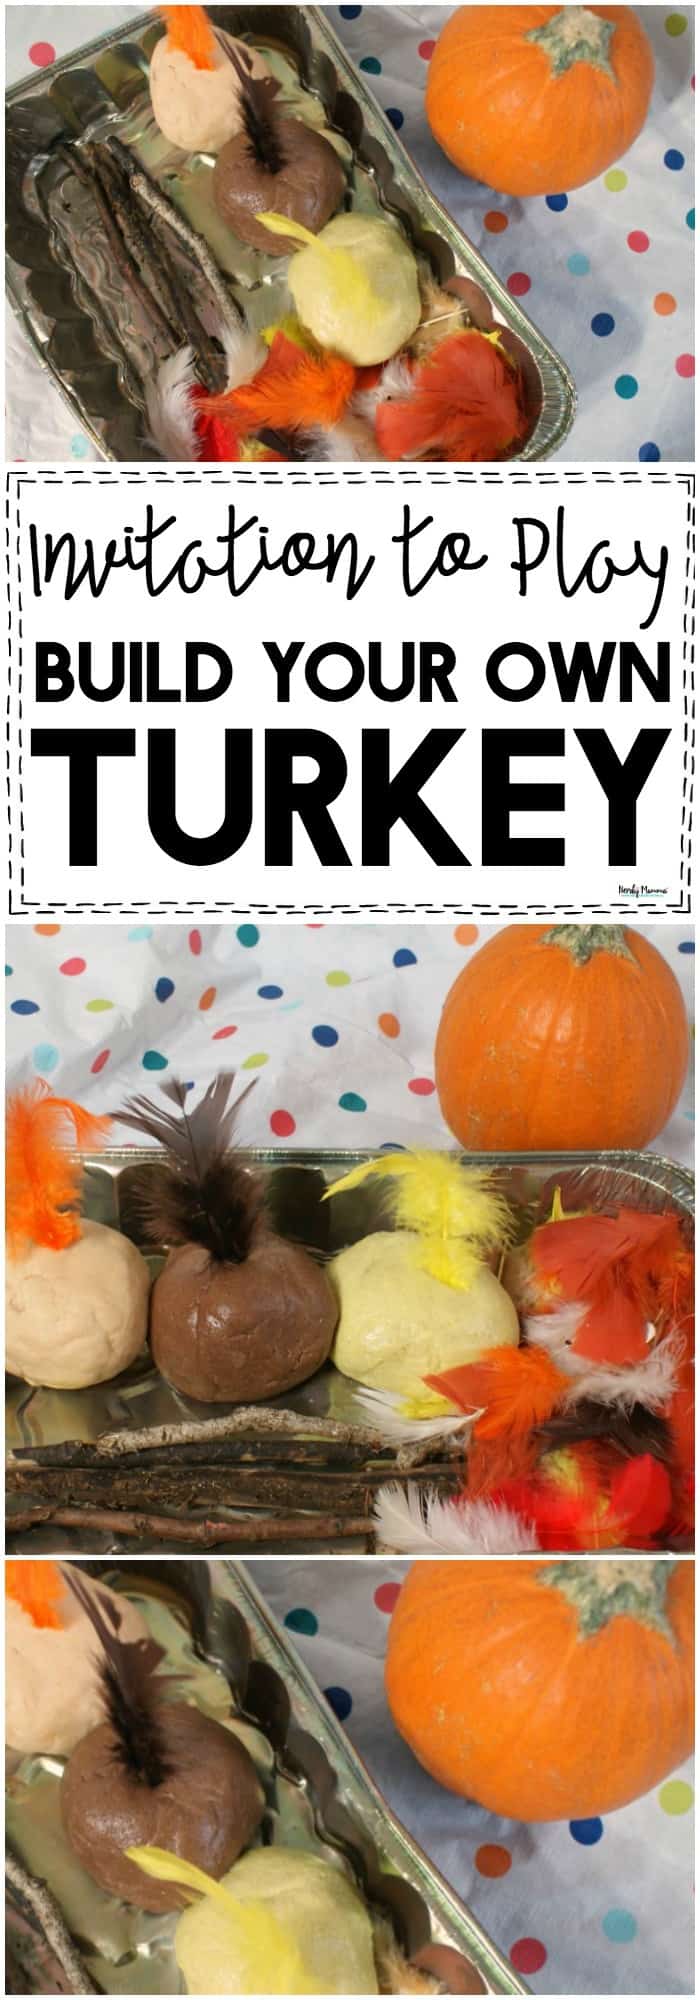 OMG Y'all. This is the CUTEST Thanksgiving invitation to play I've EVER seen! Let your kiddos build their OWN turkey, while you cook your turkey!! #invitationtoplay #Thanksgiving #kidsactivities #turkey